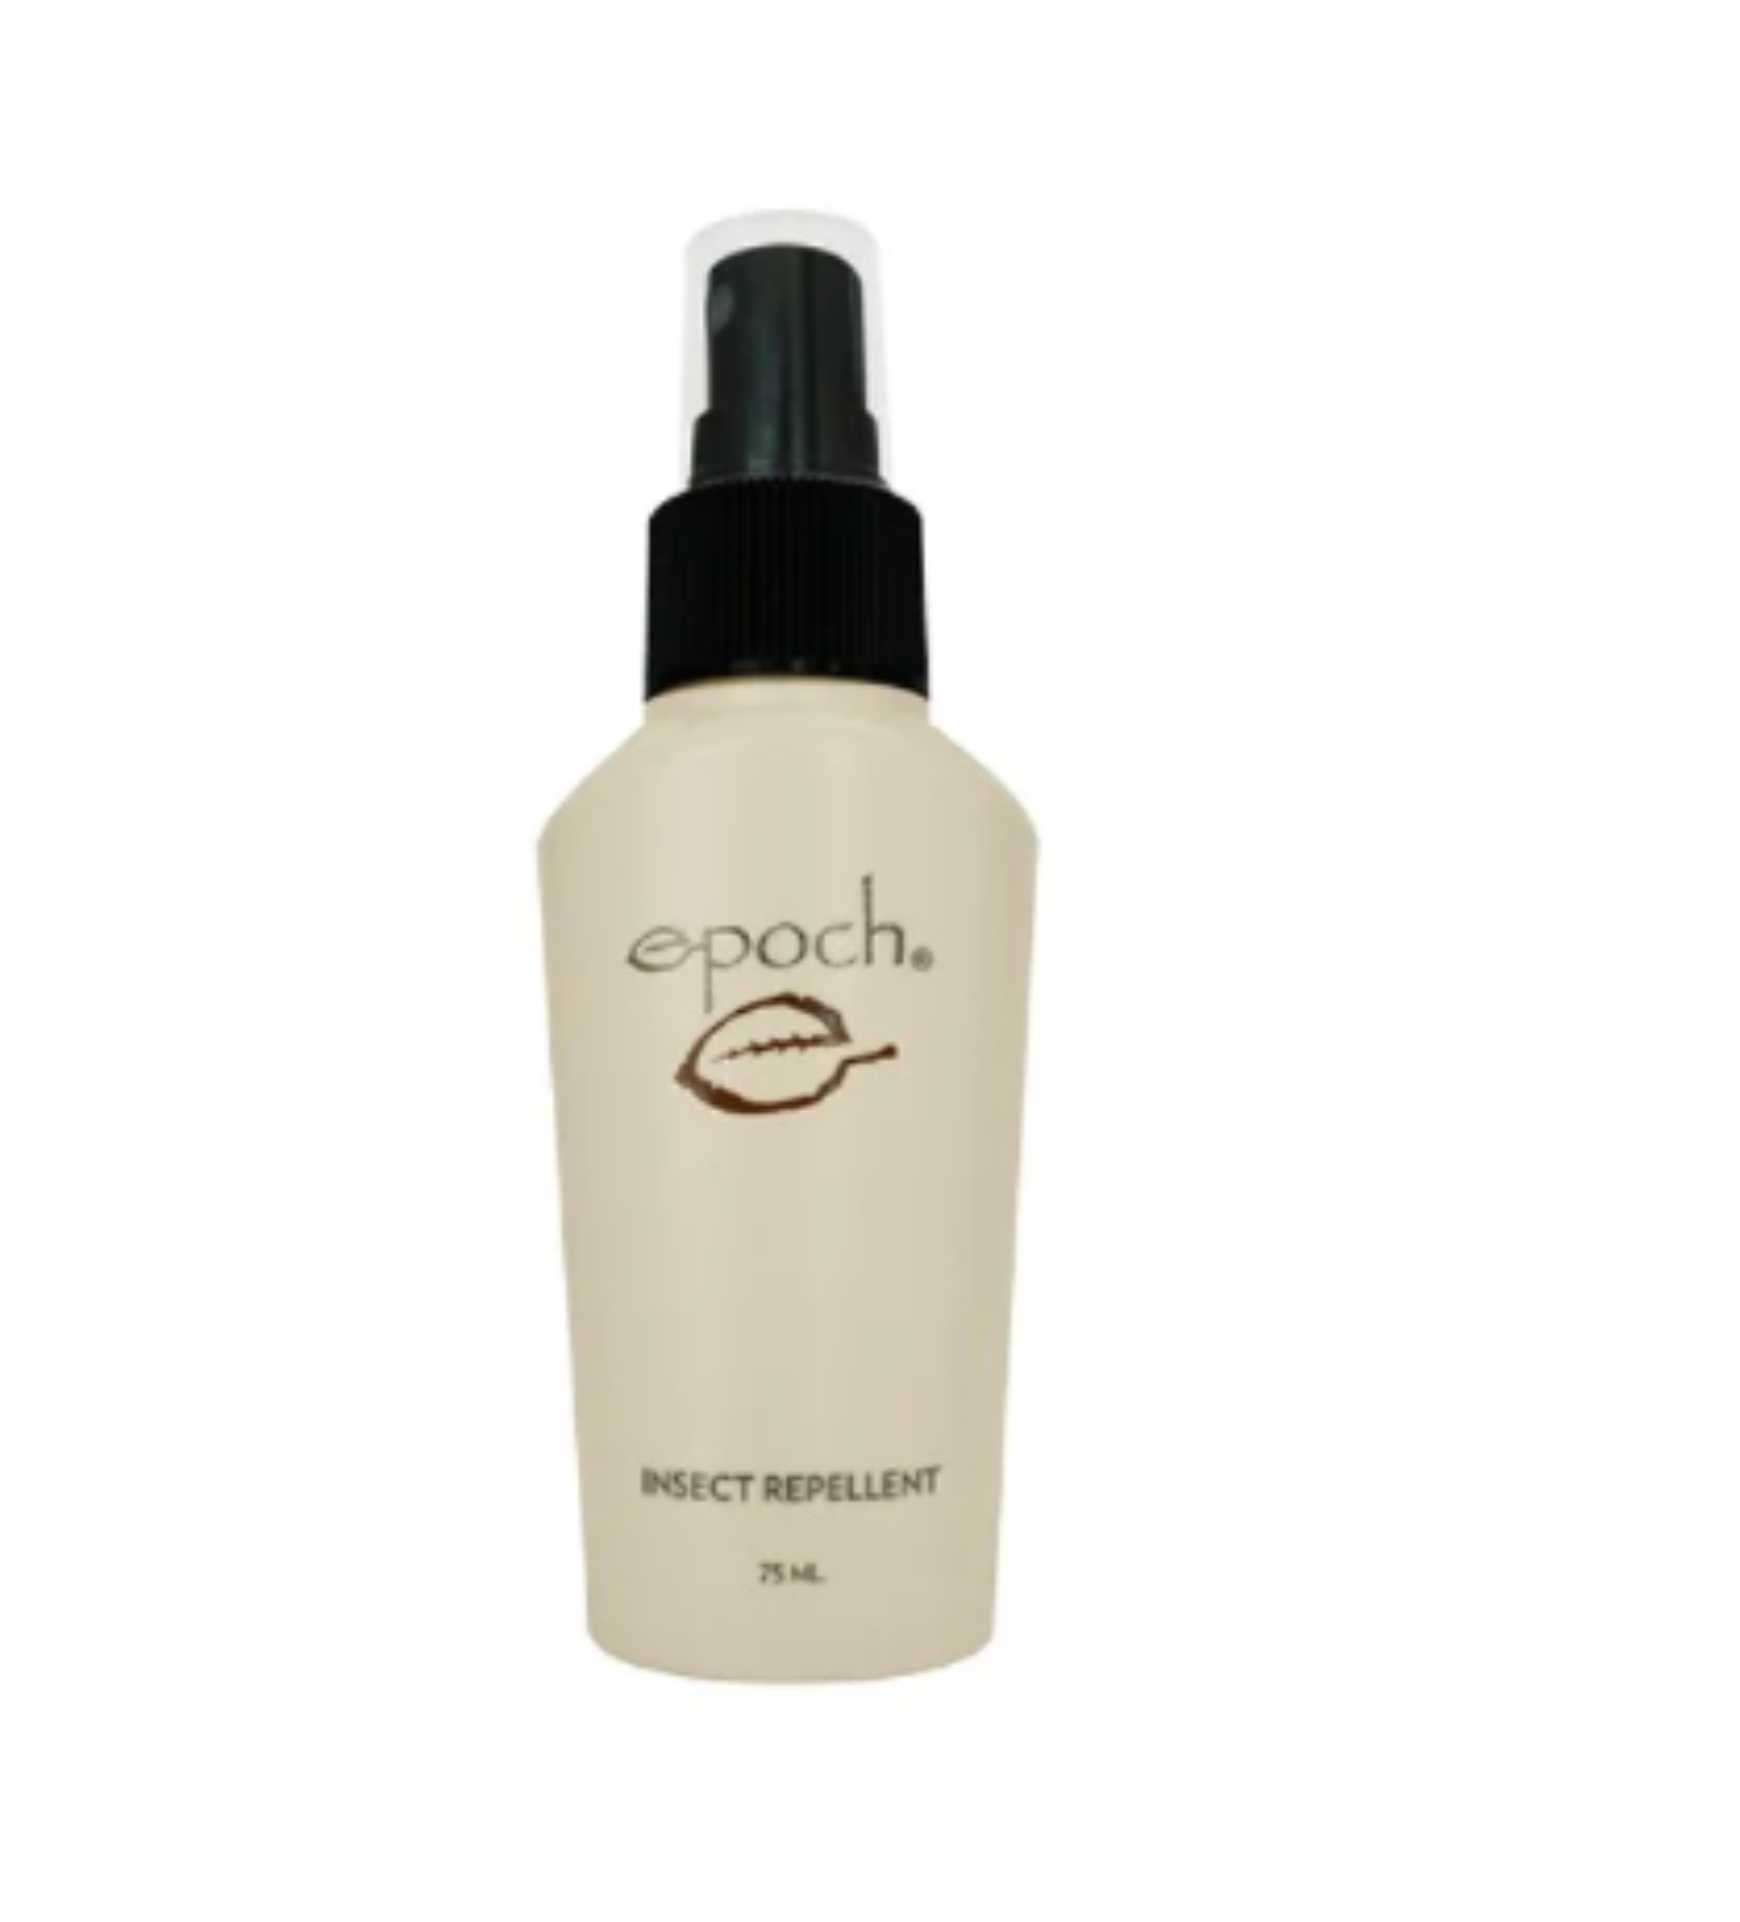 Epoch® Insect Repellent